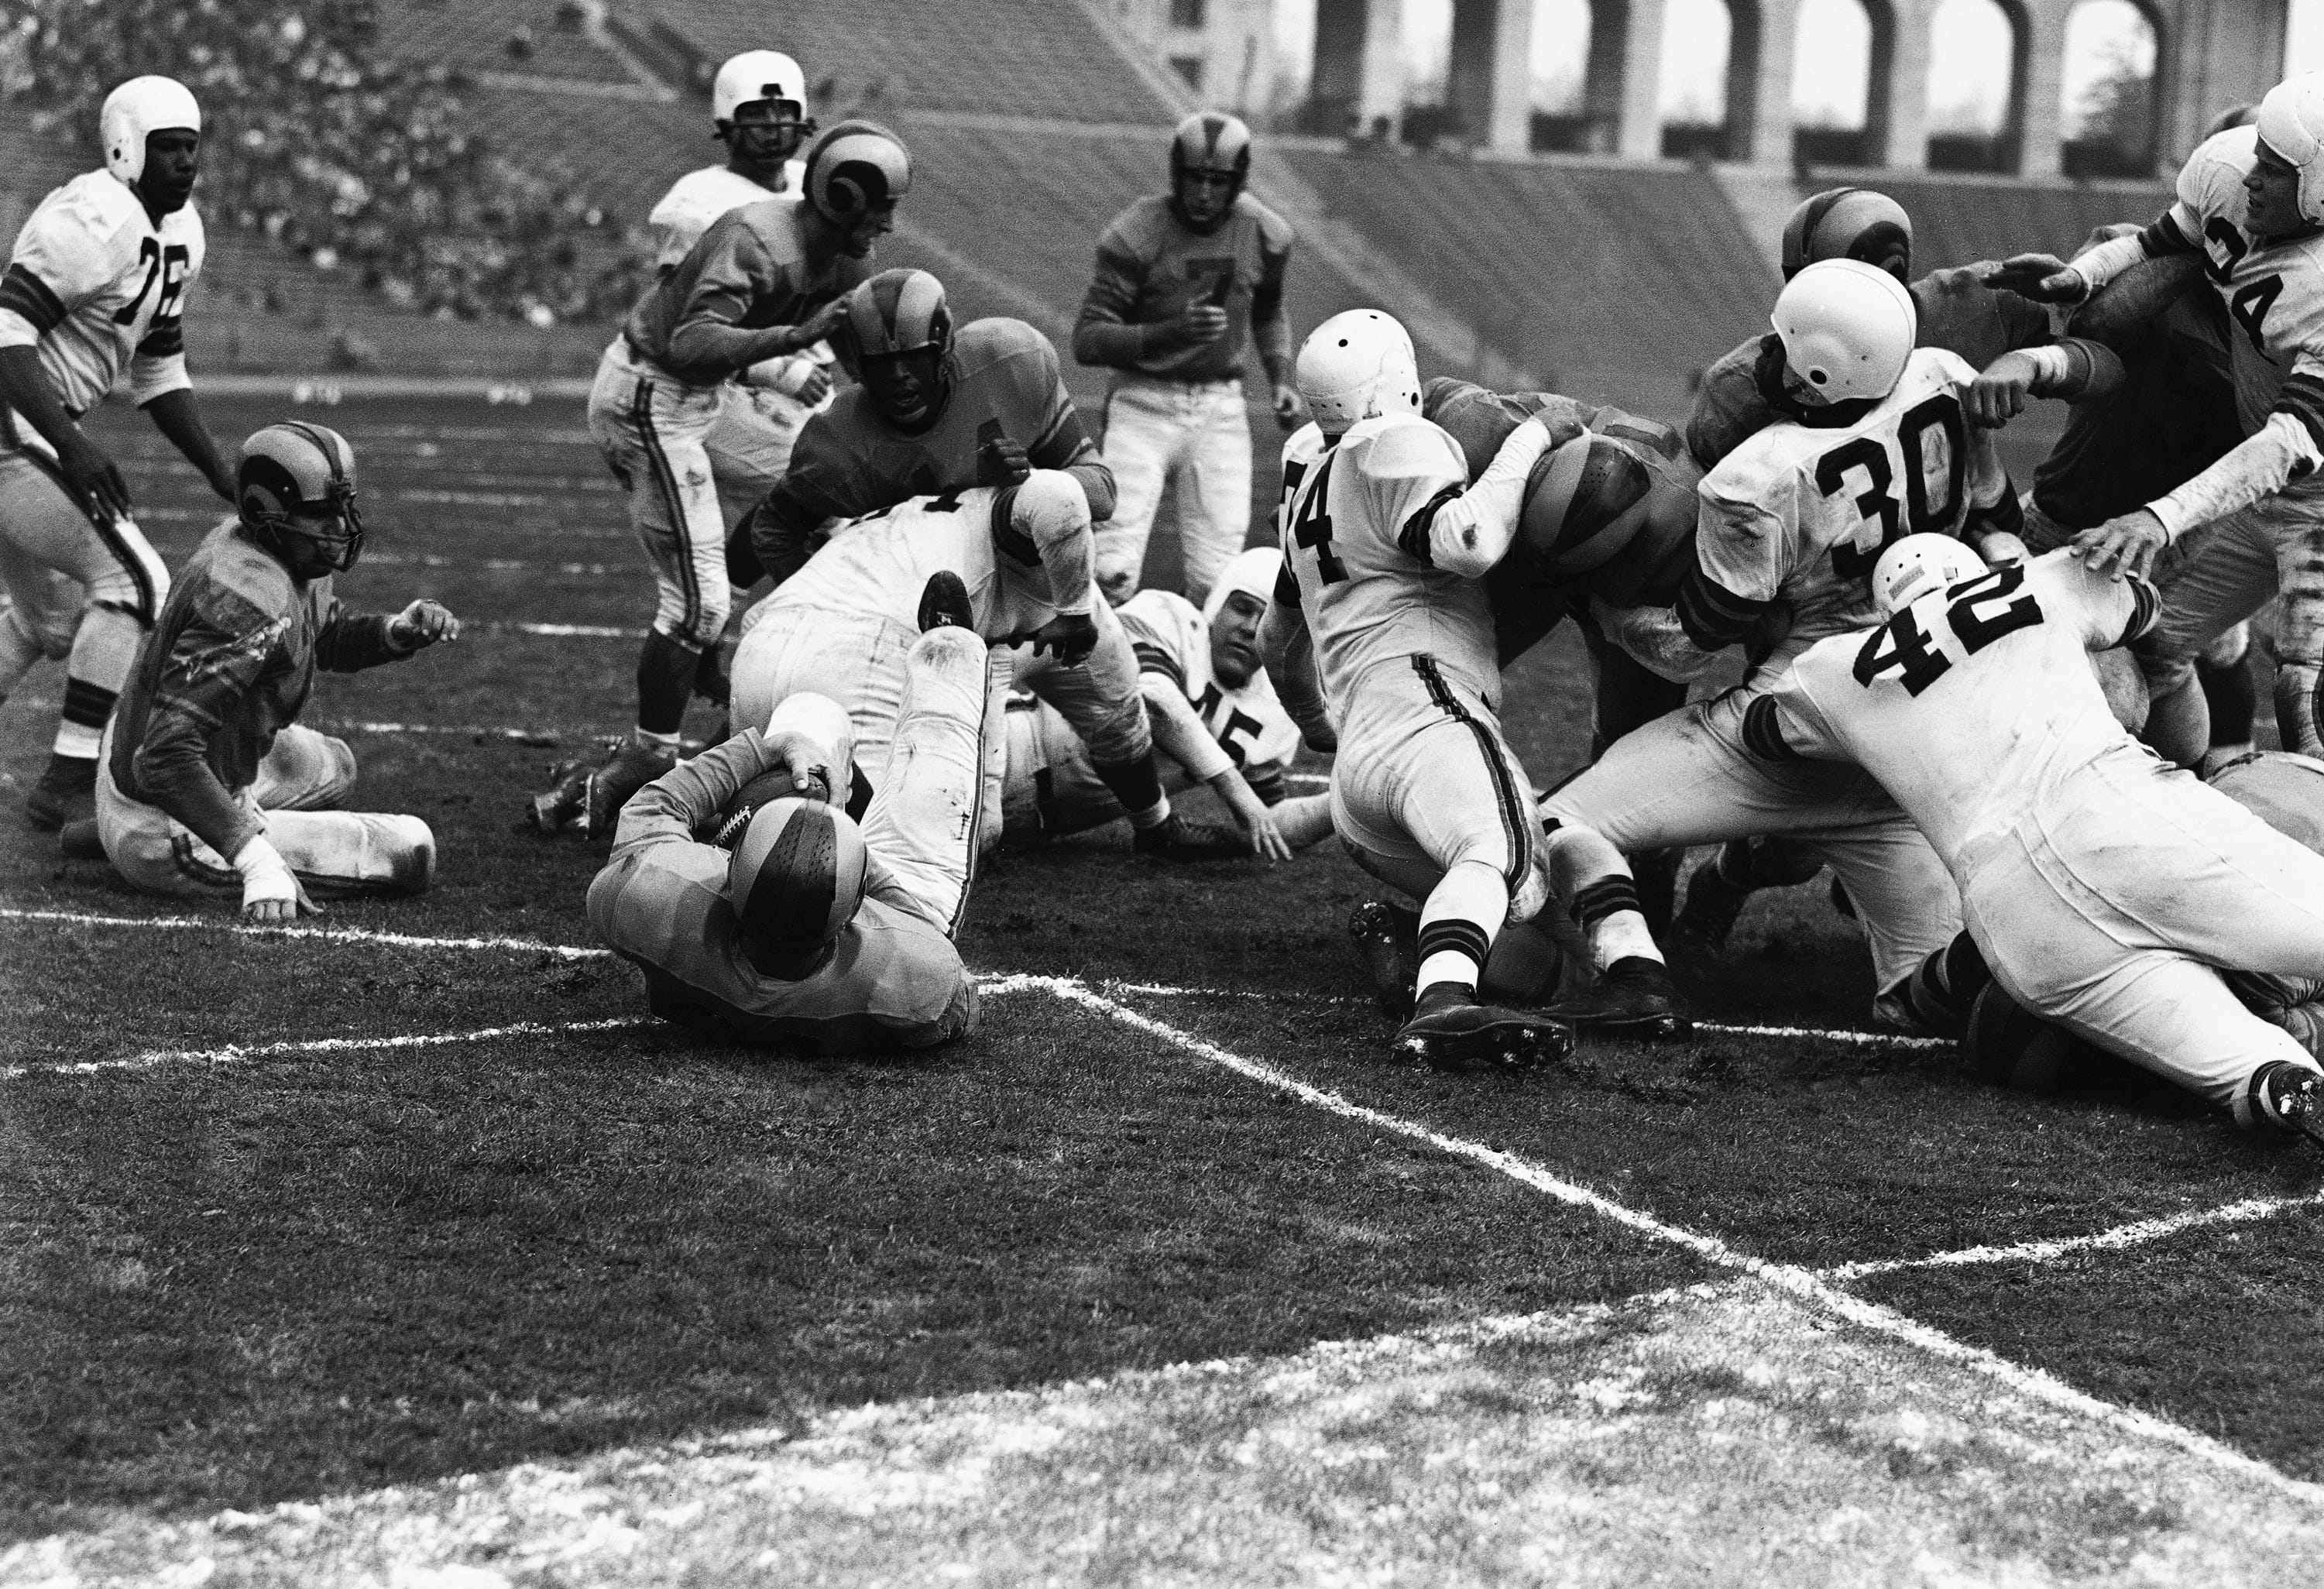 Los Angeles Rams fullback Dick Hoerner lands on his back in the end zone to score a touchdown against the Cleveland Browns in the 1951 NFL championship game at the Coliseum.